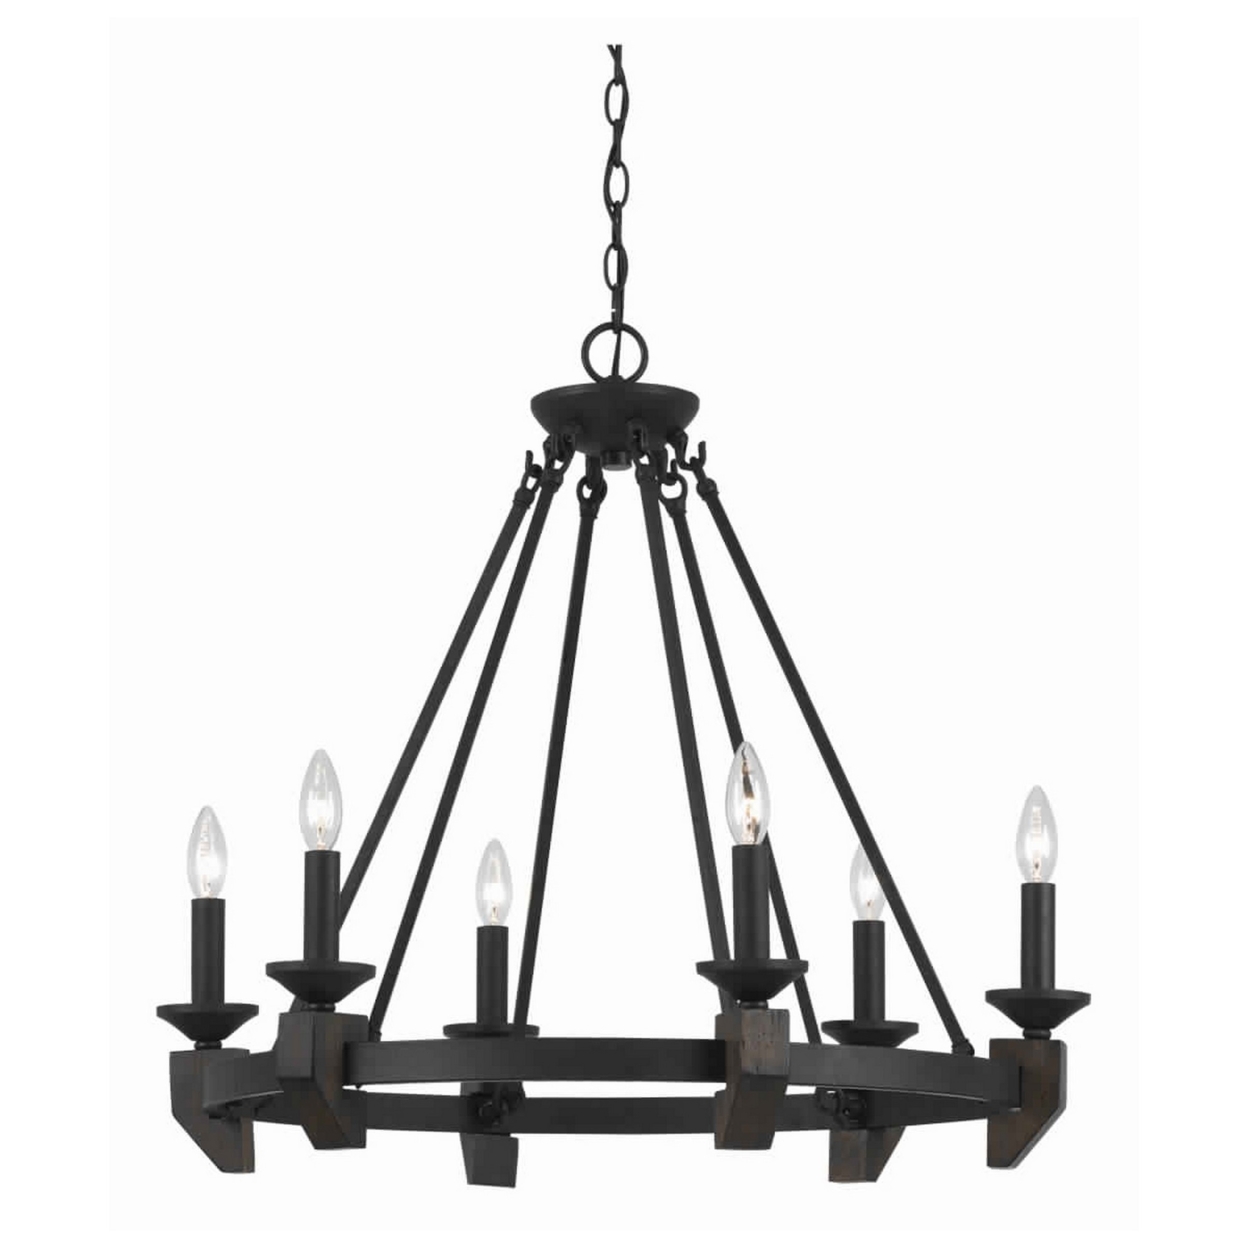 6 Bulb Metal Frame Wagon Wheel Candle Chandelier With Wooden Accents, Black- Saltoro Sherpi